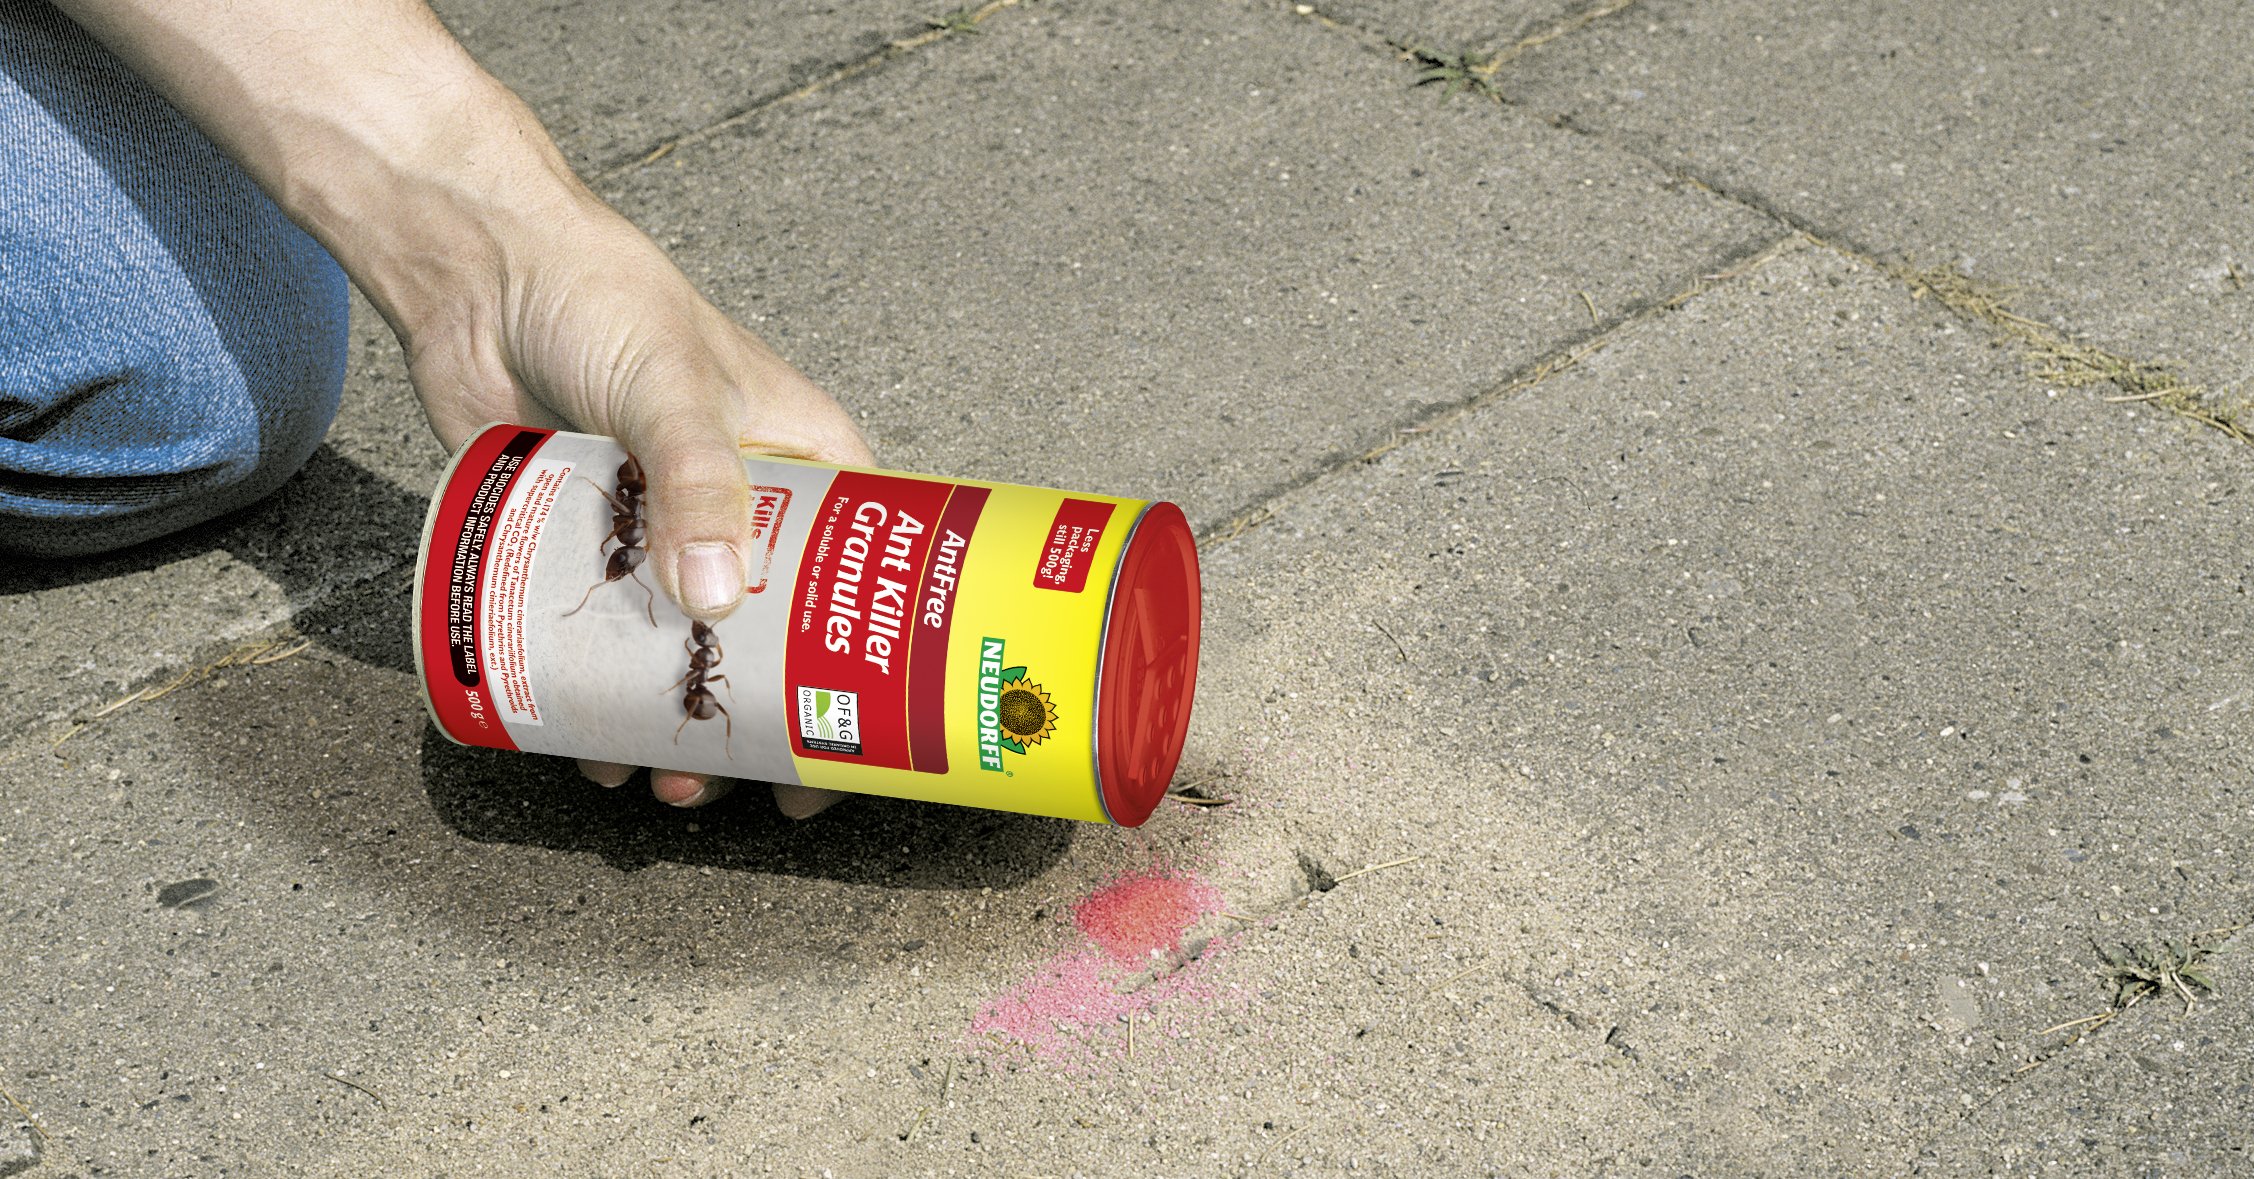 Neudorff’s AntFree Ant Killer Granules can be scattered dry straight from the pack